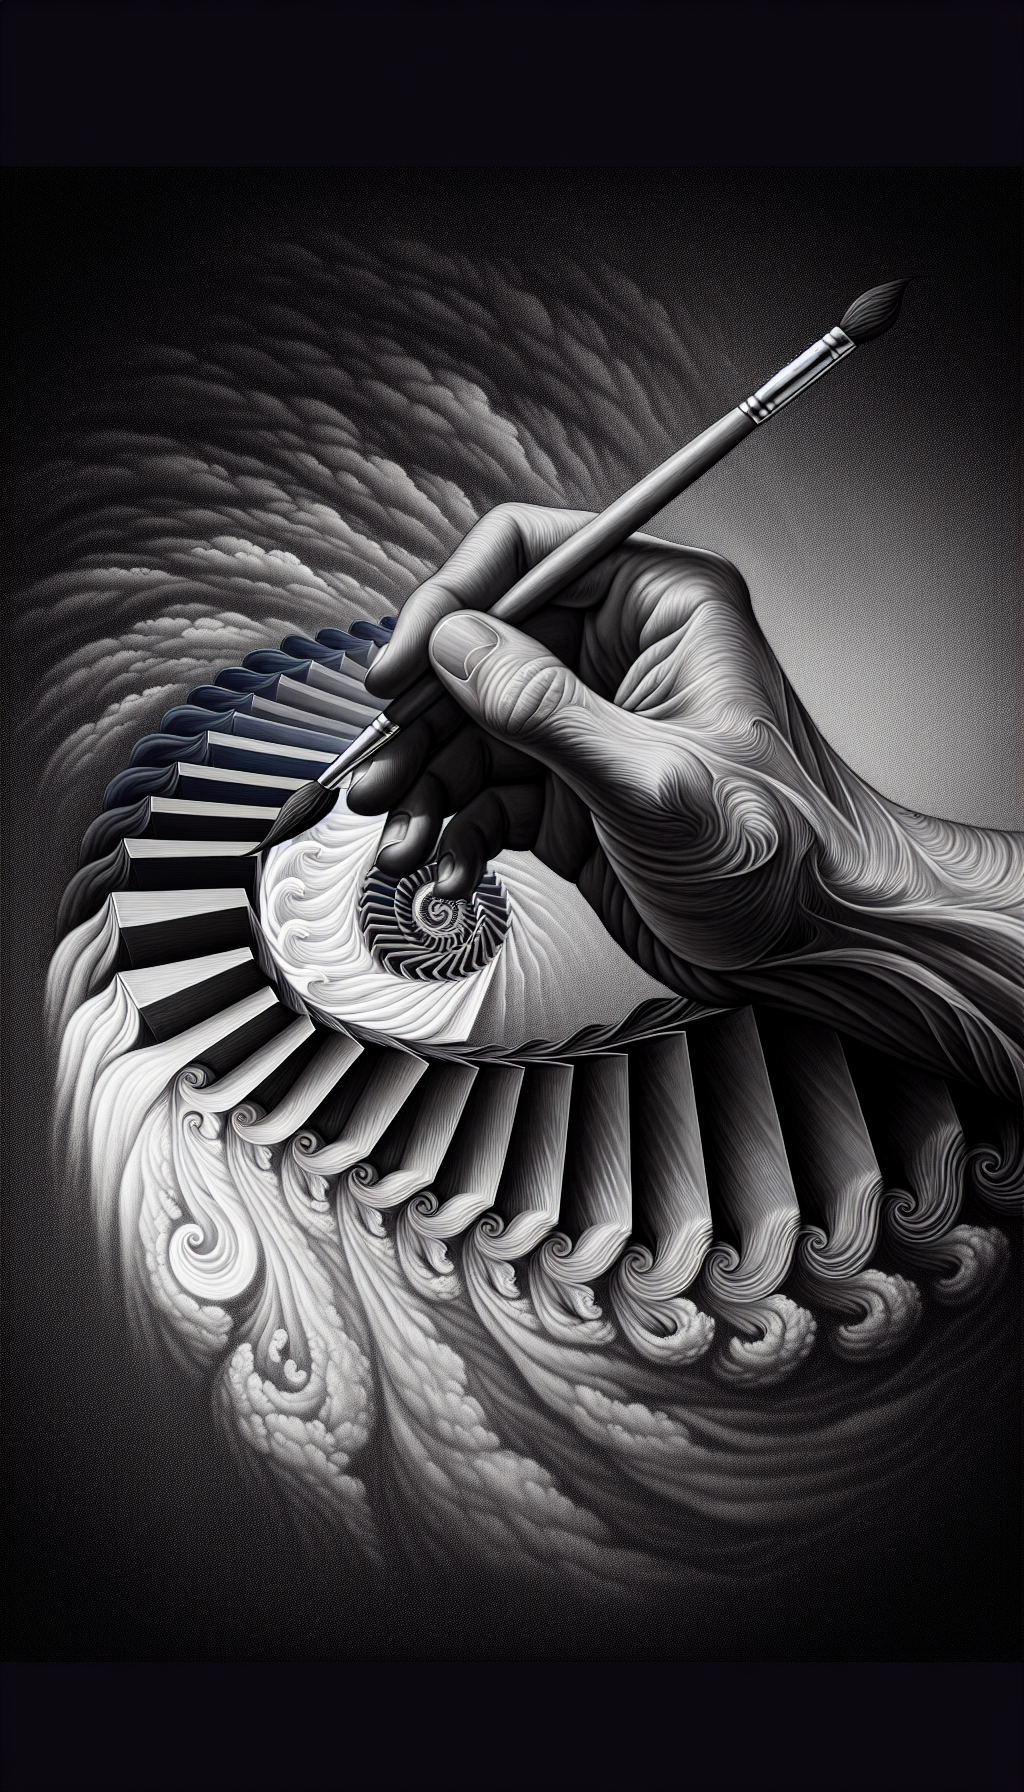 An illustration depicts an artist's hand emerging from the canvas, holding a paintbrush that applies a grayscale spectrum. As the grayscale brushstrokes stretch across the canvas, they transform into a three-dimensional, spiraling staircase, demonstrating value's power to create depth, with each step transitioning from white to black to symbolize the element of art value.